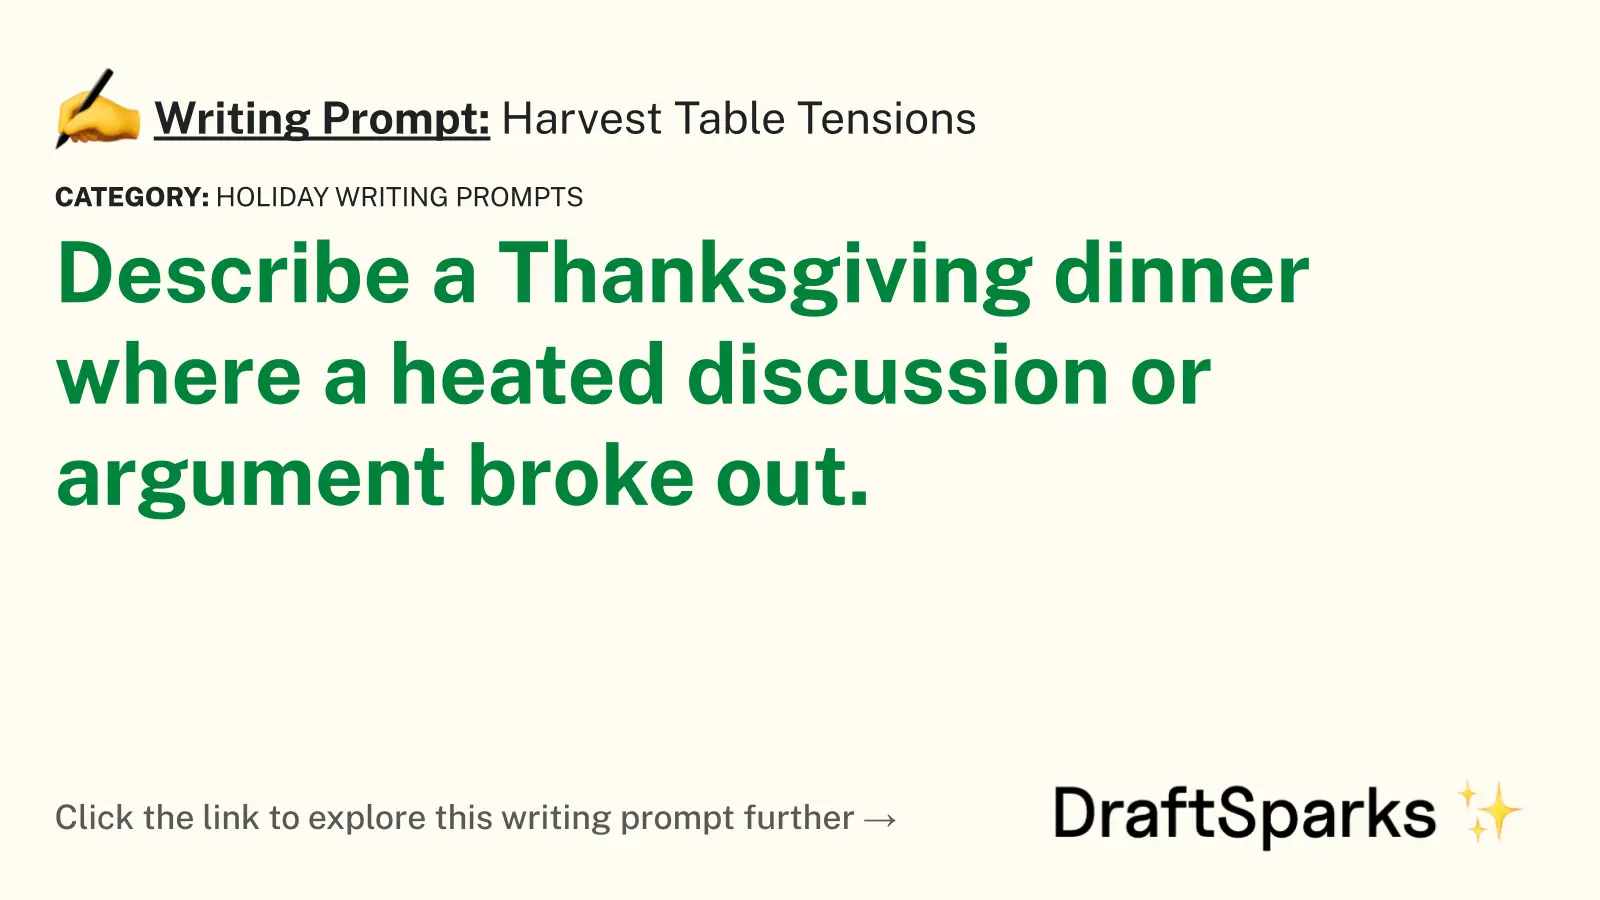 Harvest Table Tensions